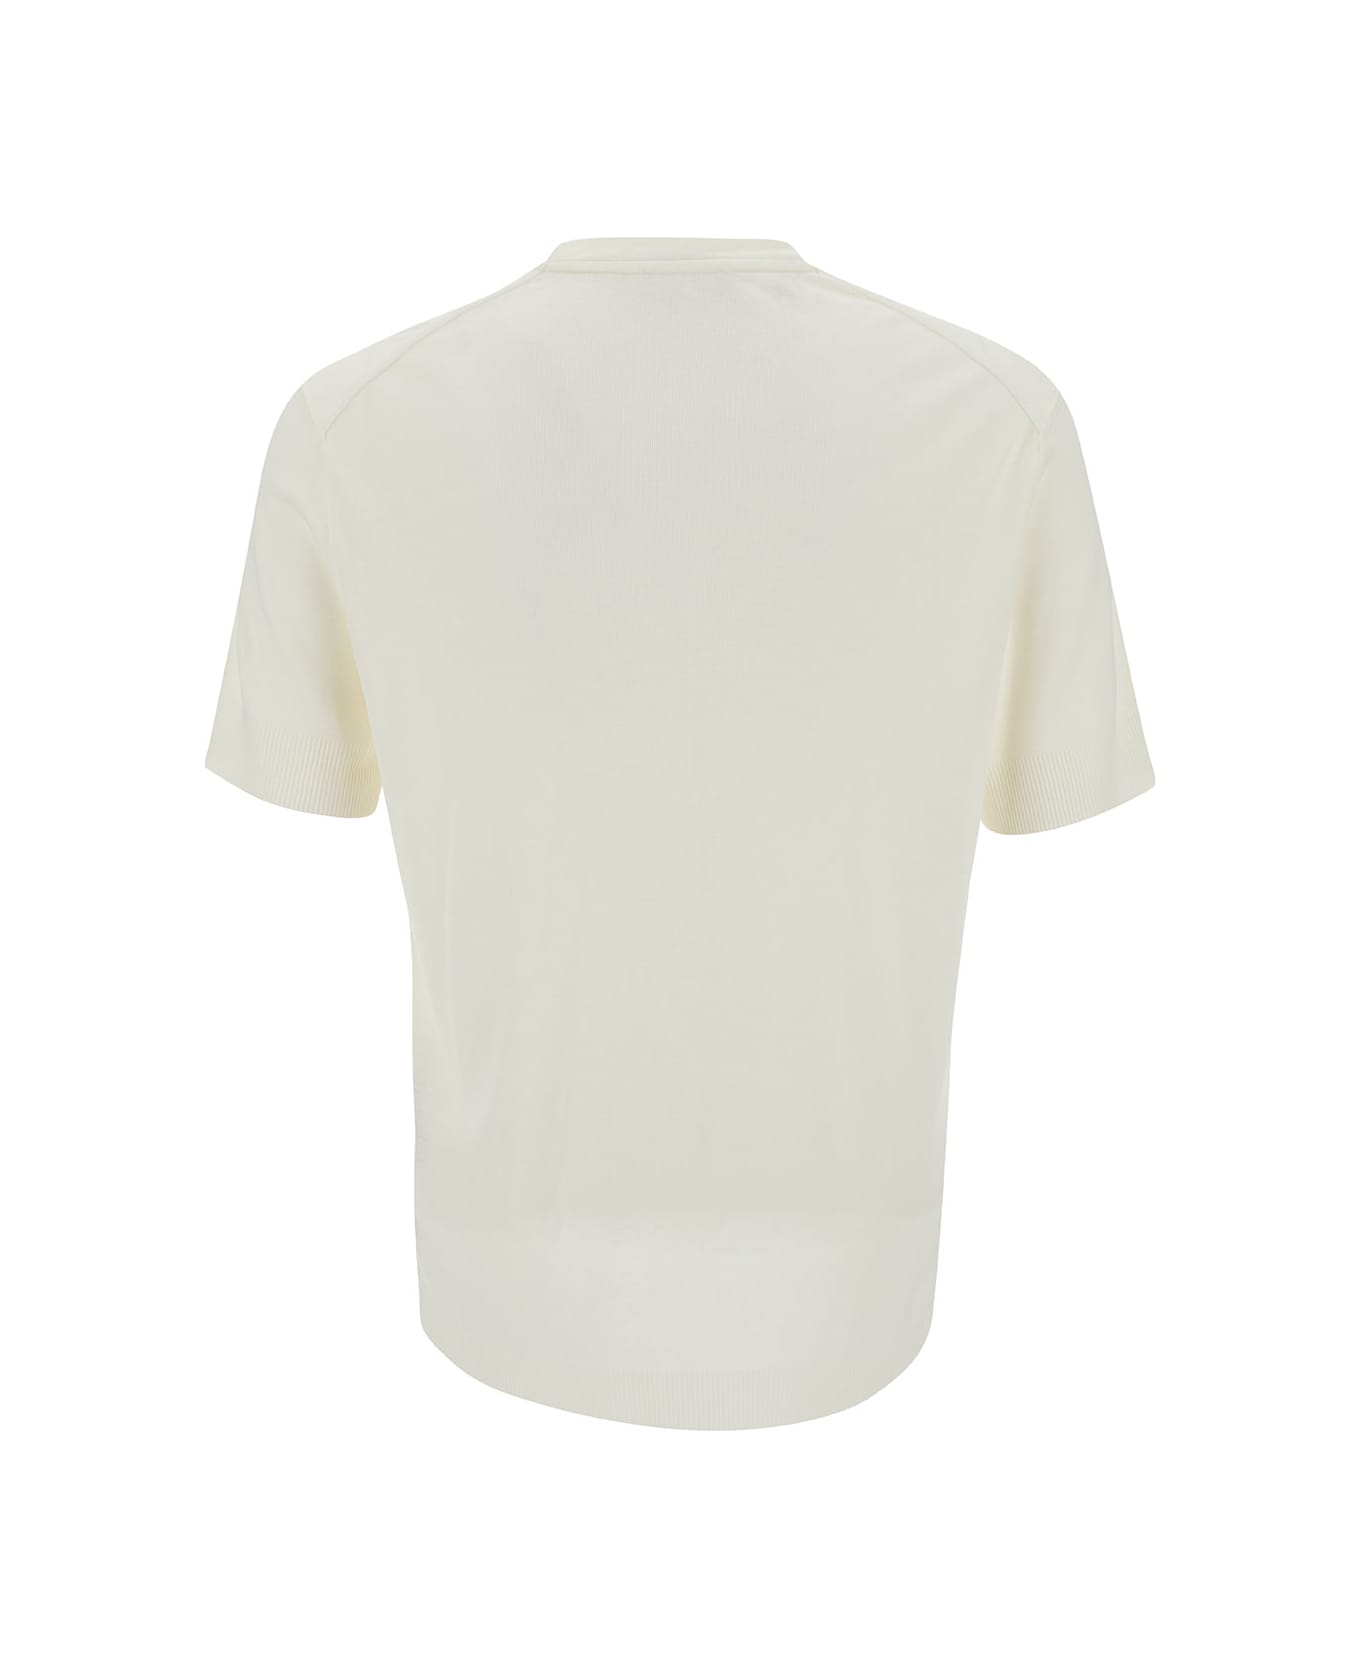 Tom Ford White Crewneck T-shirt With Ribbed Trim In Lyocell Blend Man - White